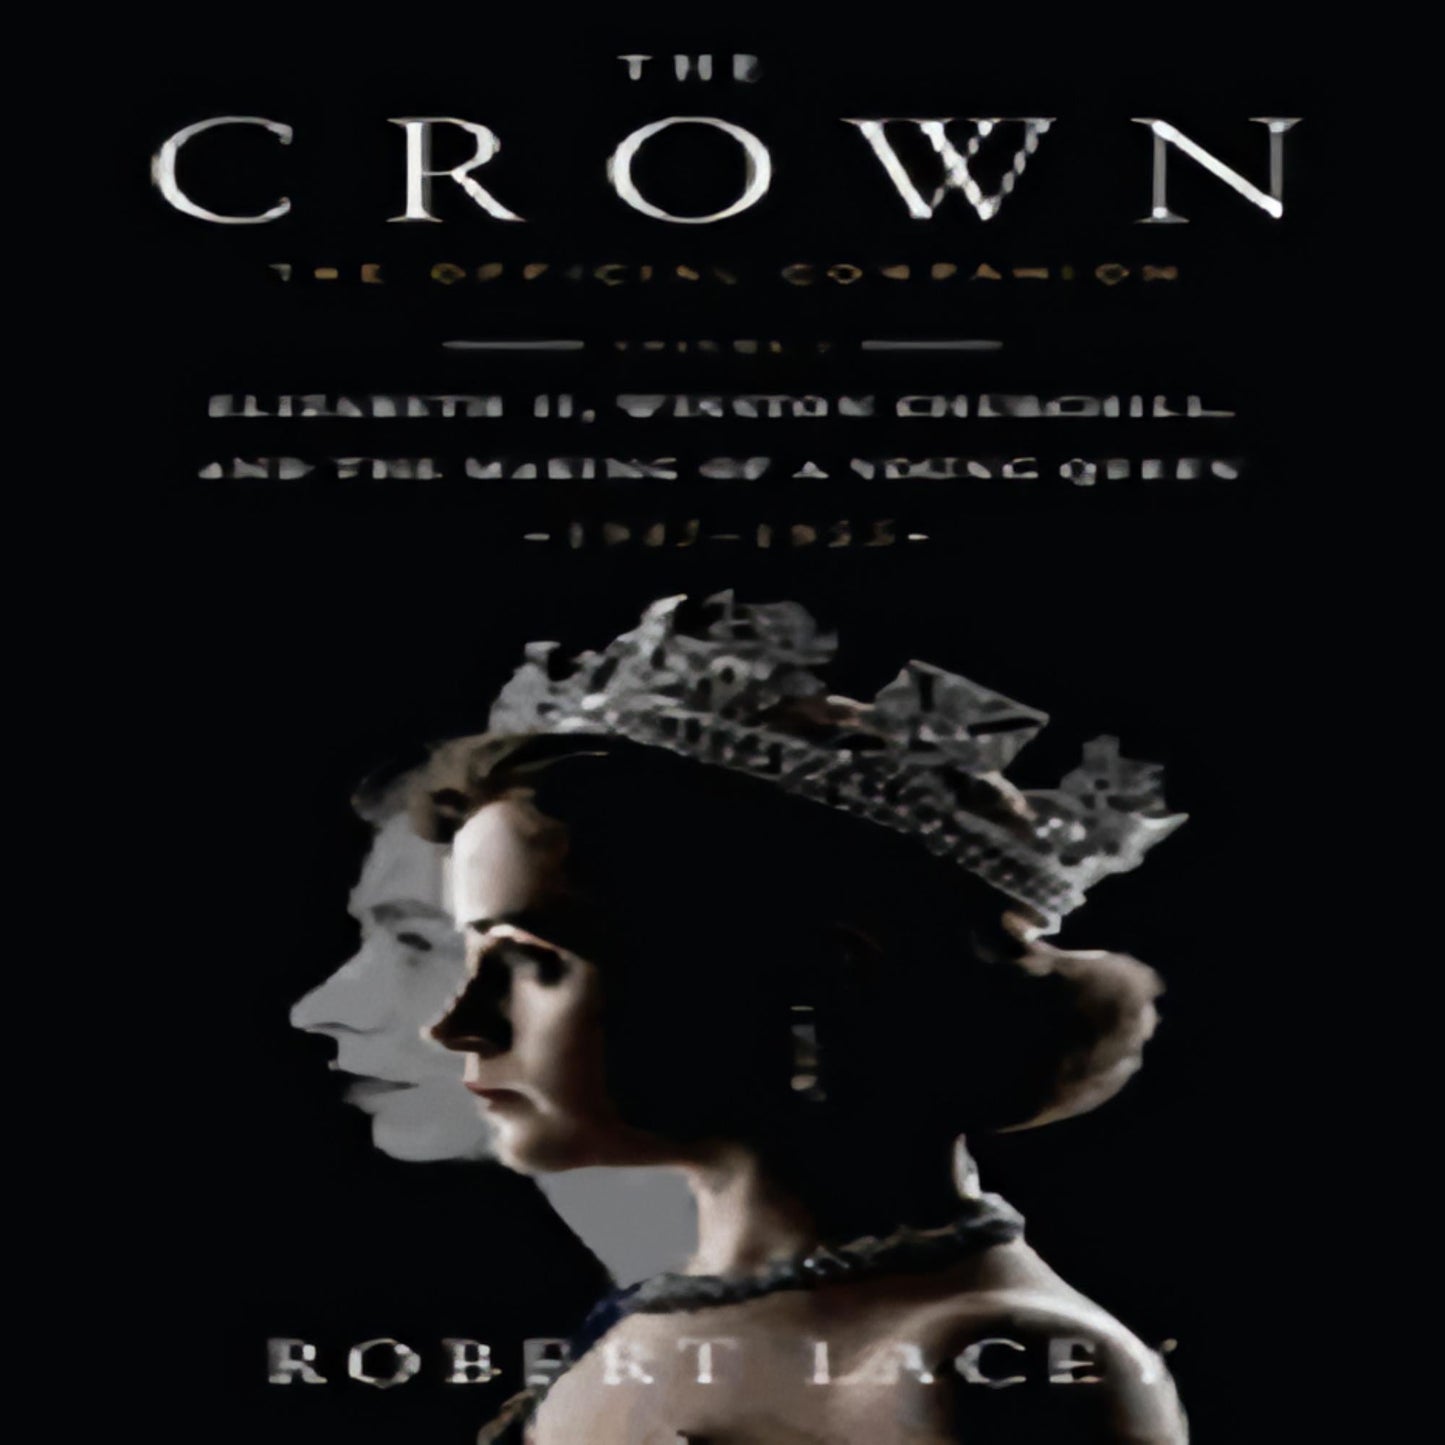 The Crown: The Official Companion, Volume 1: Elizabeth II, Winston Churchill, and the Making of a Young Queen (1947-1955) (Crown #1)43-012123-1524762288DPGBOOKSTORE.COM. Today's Bestsellers.